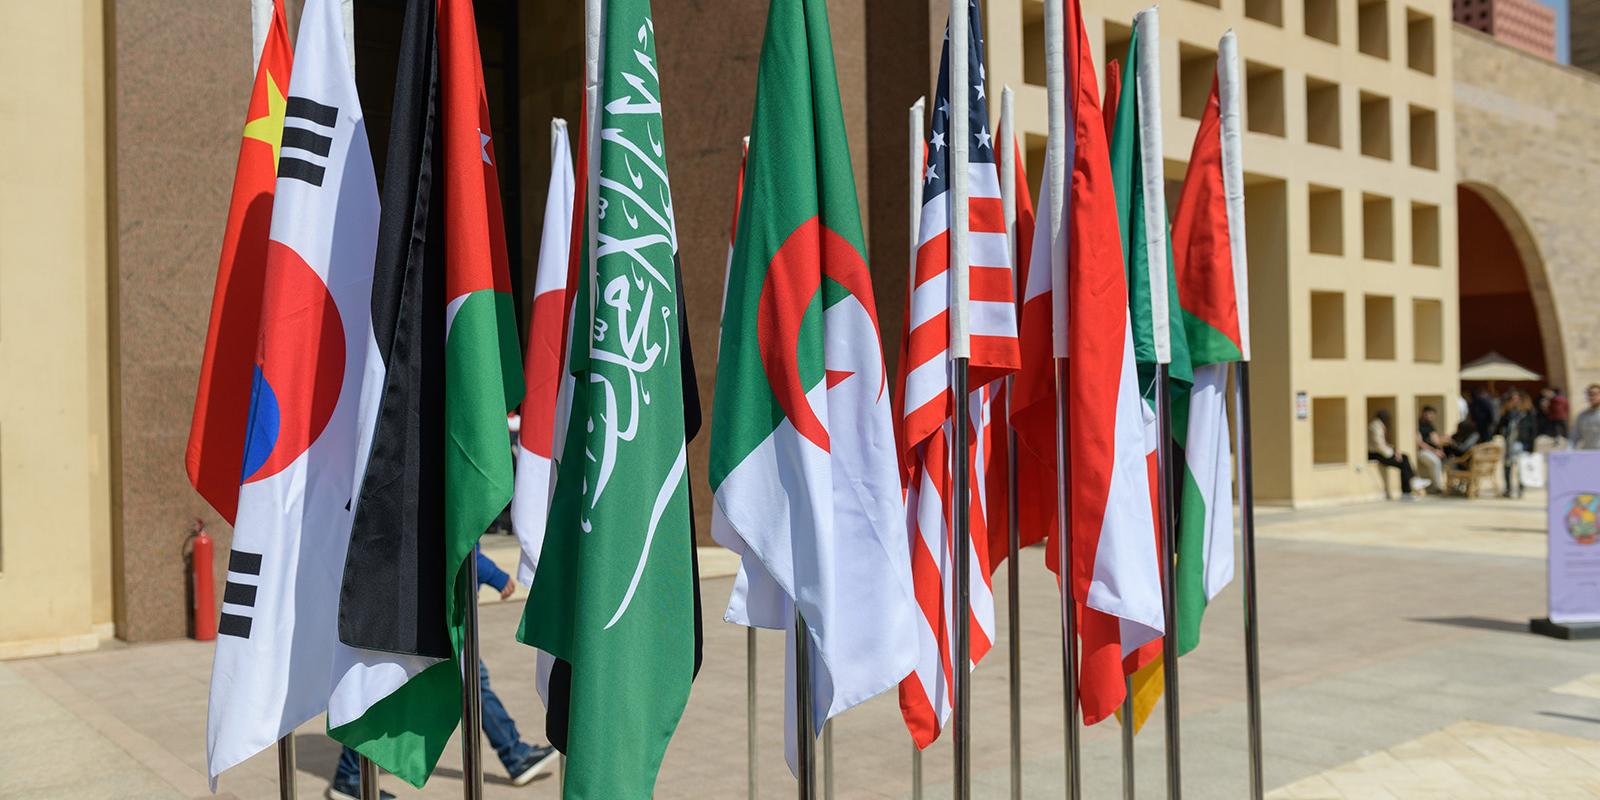 A group of international flags 